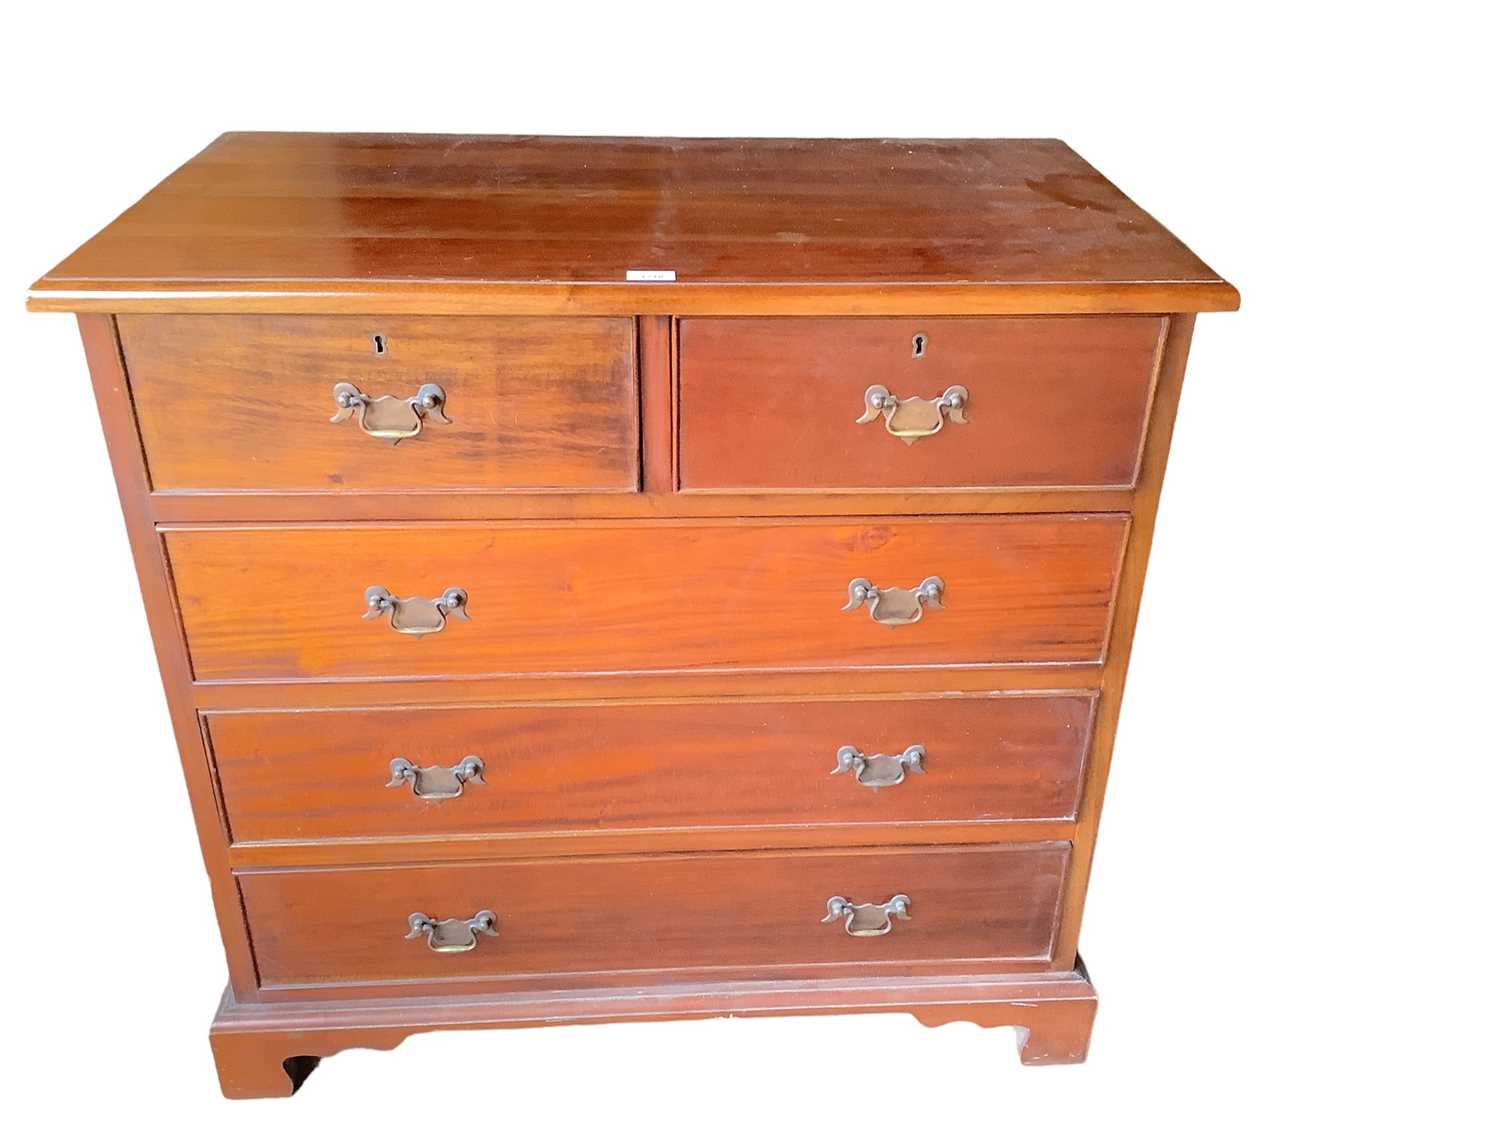 George III style mahogany chest of drawers